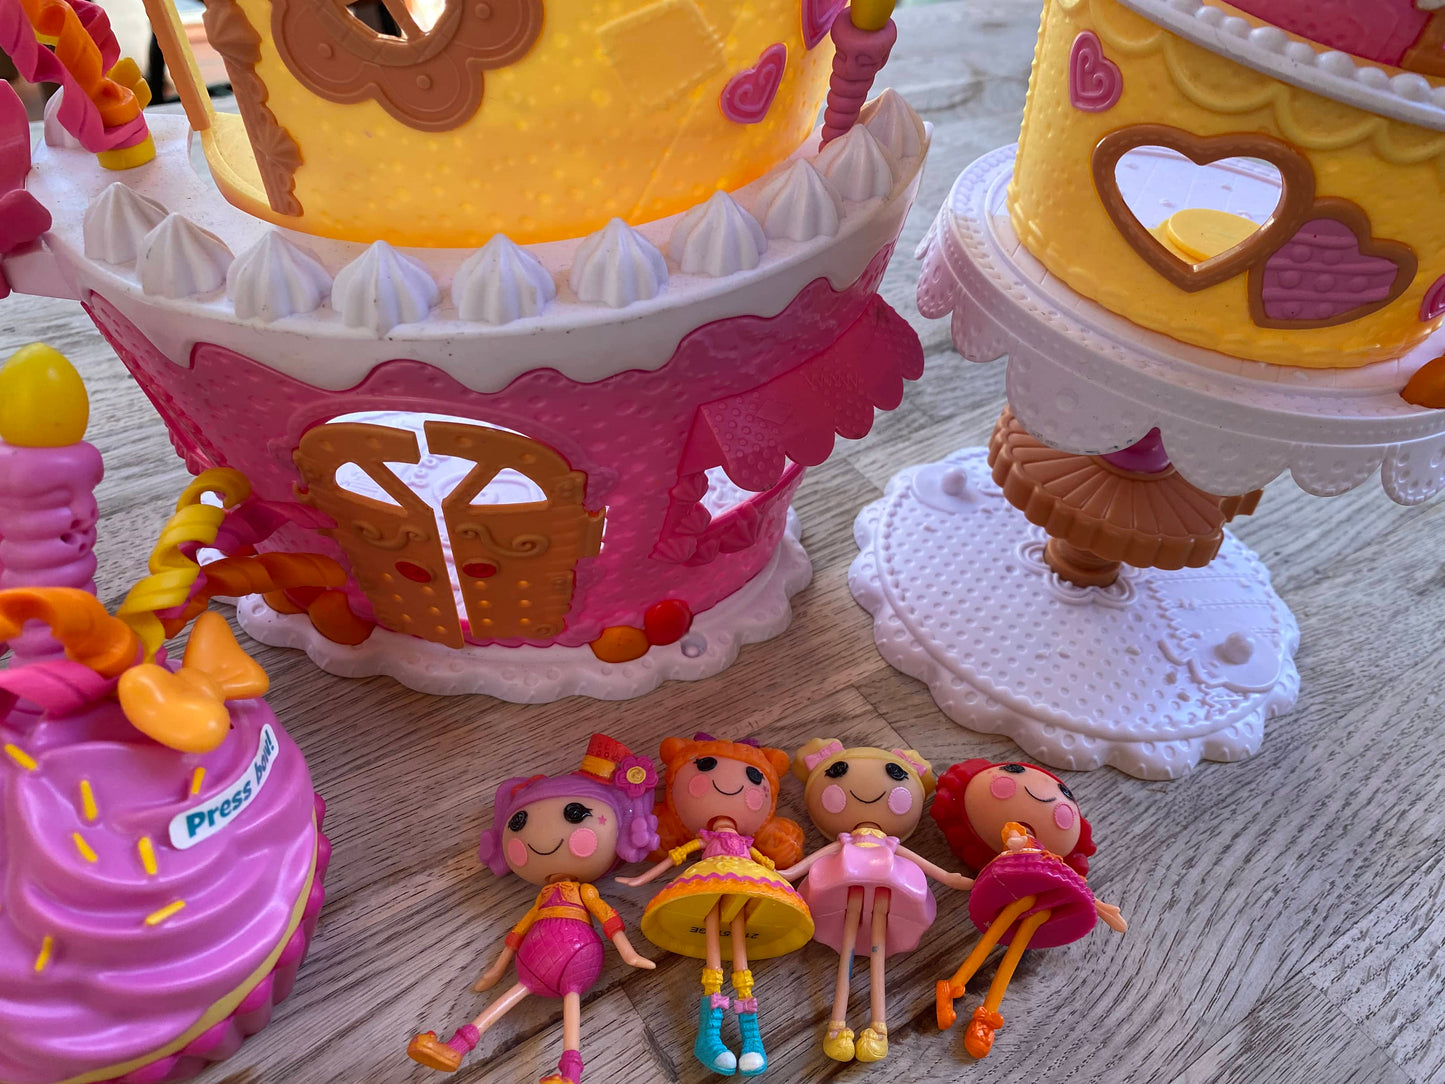 Mini Lalaloopsy Super Silly Party Cake Play Set